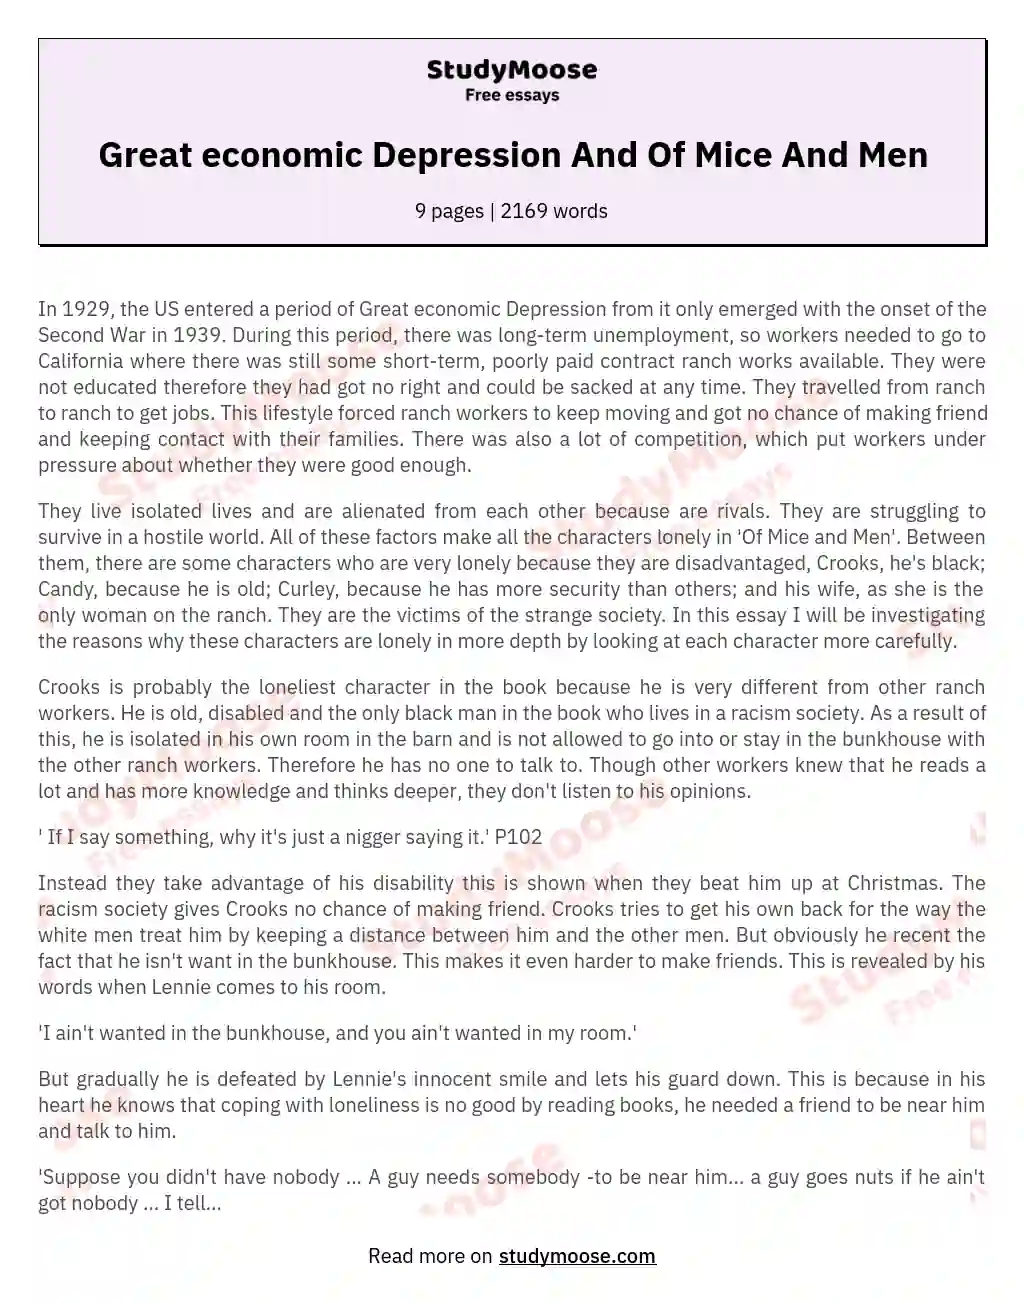 Great economic Depression And Of Mice And Men essay